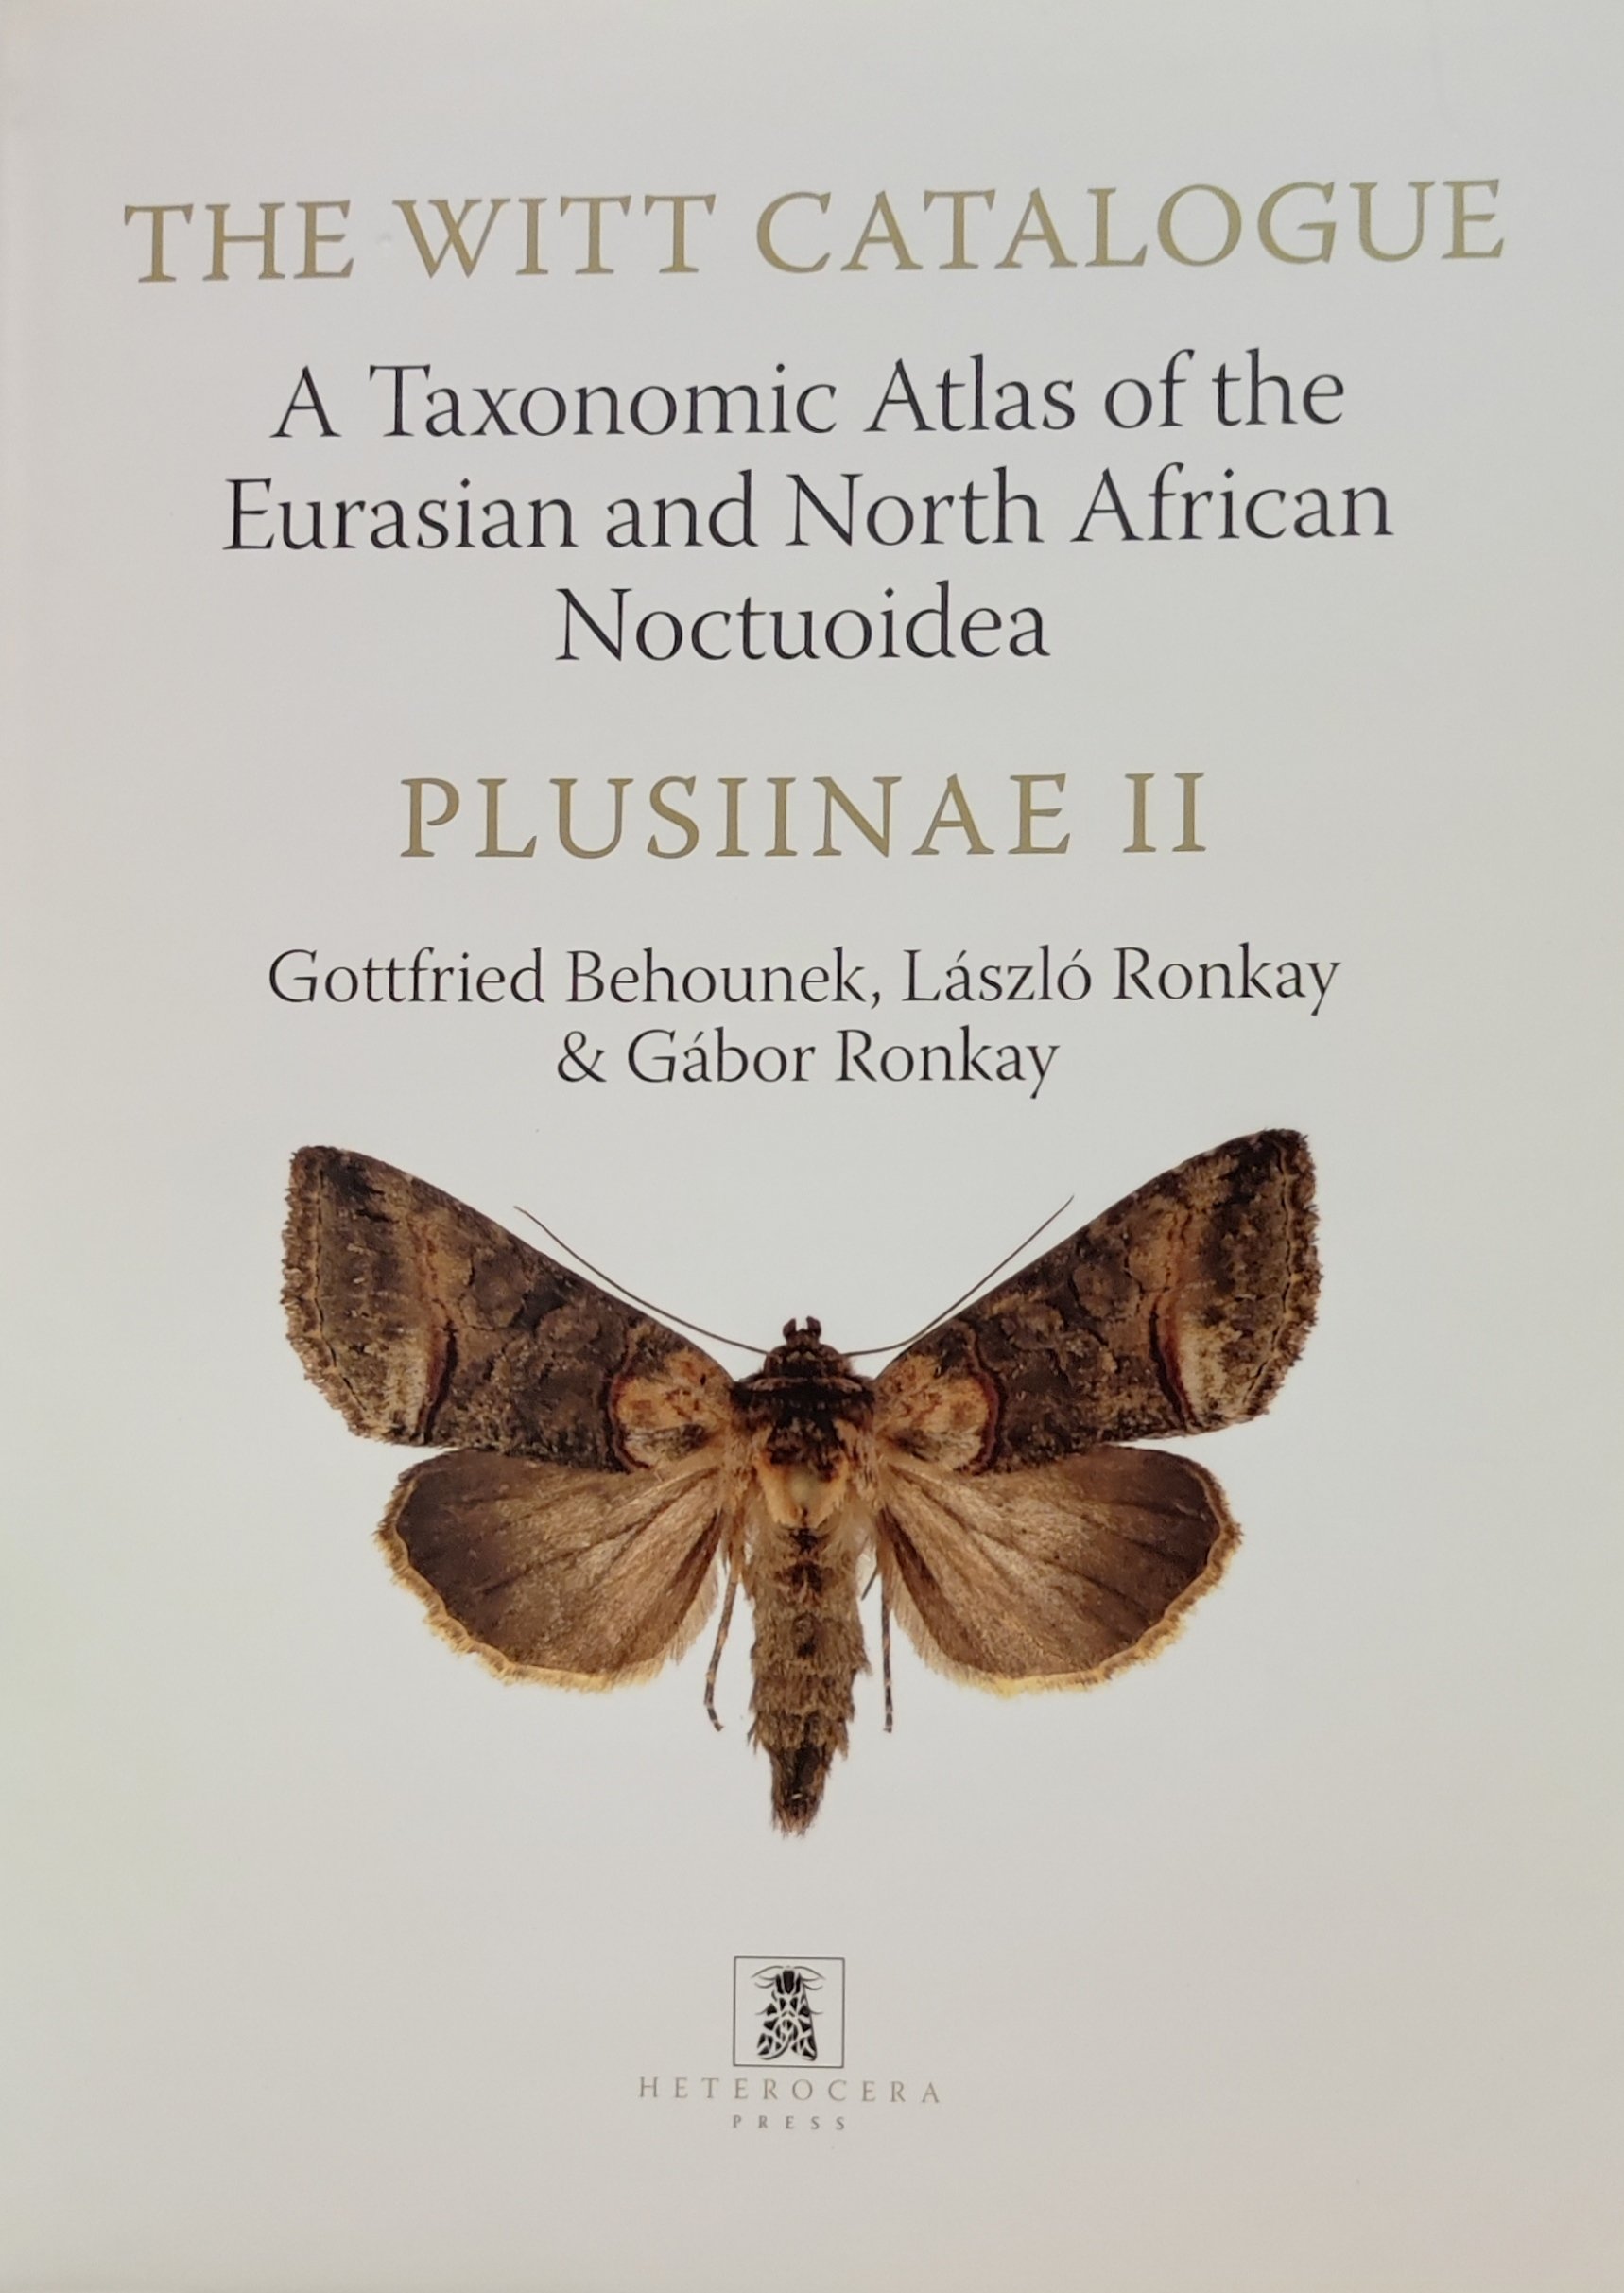 The Witt Catalogue: A Taxonomic Atlas of the Eurasian and North African Noctuoidea. volume 4. - Plusiinae 2. (Rippl-Rónai Múzeum CC BY-NC-ND)